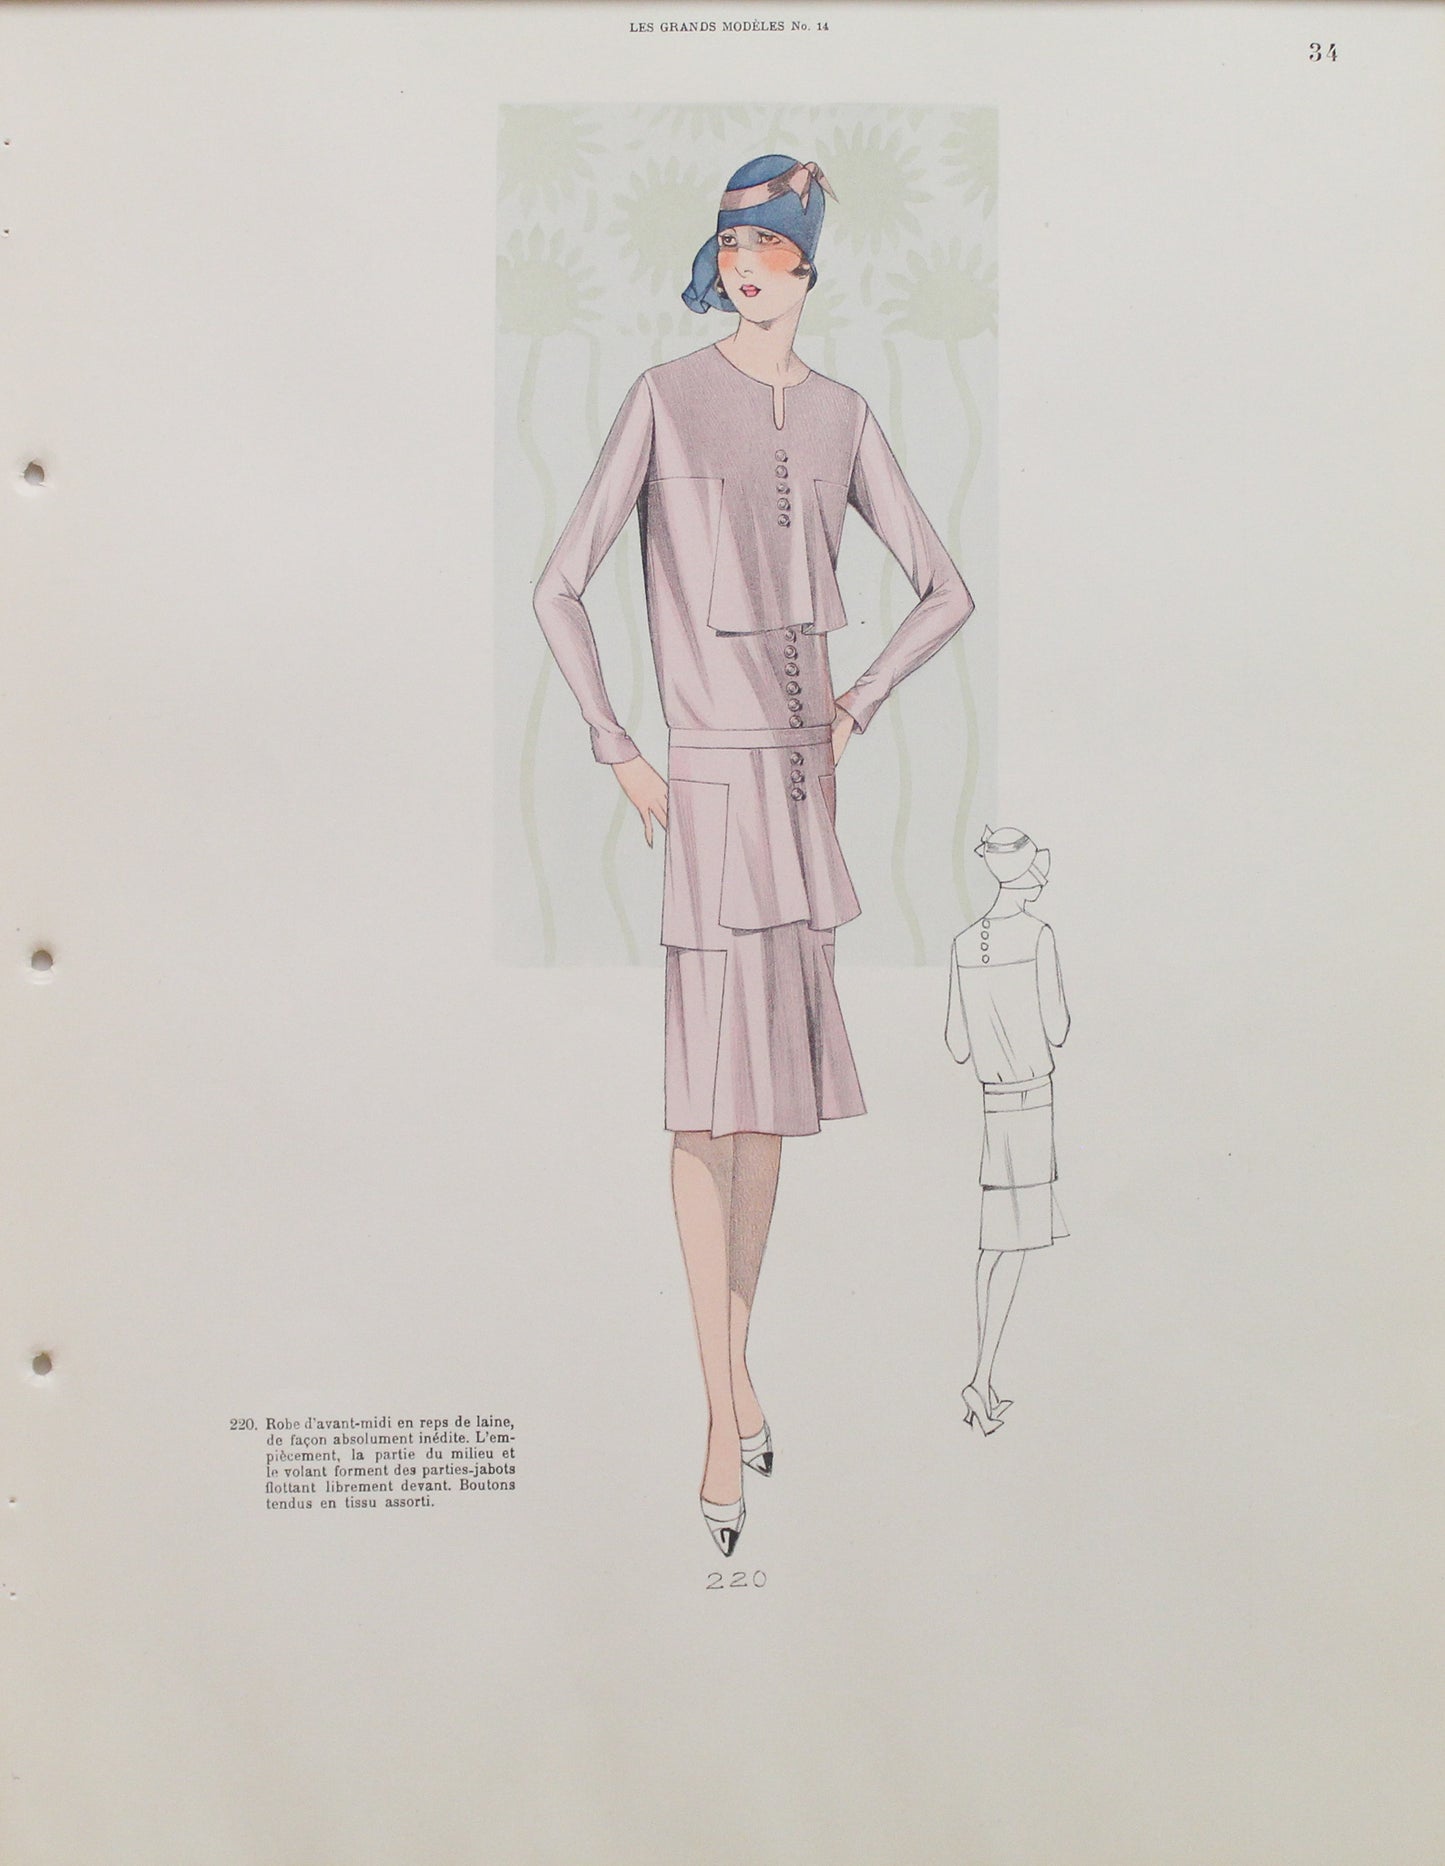 Fashion, French, Les Grands Modeles No 14, Style Number 220, 1920s